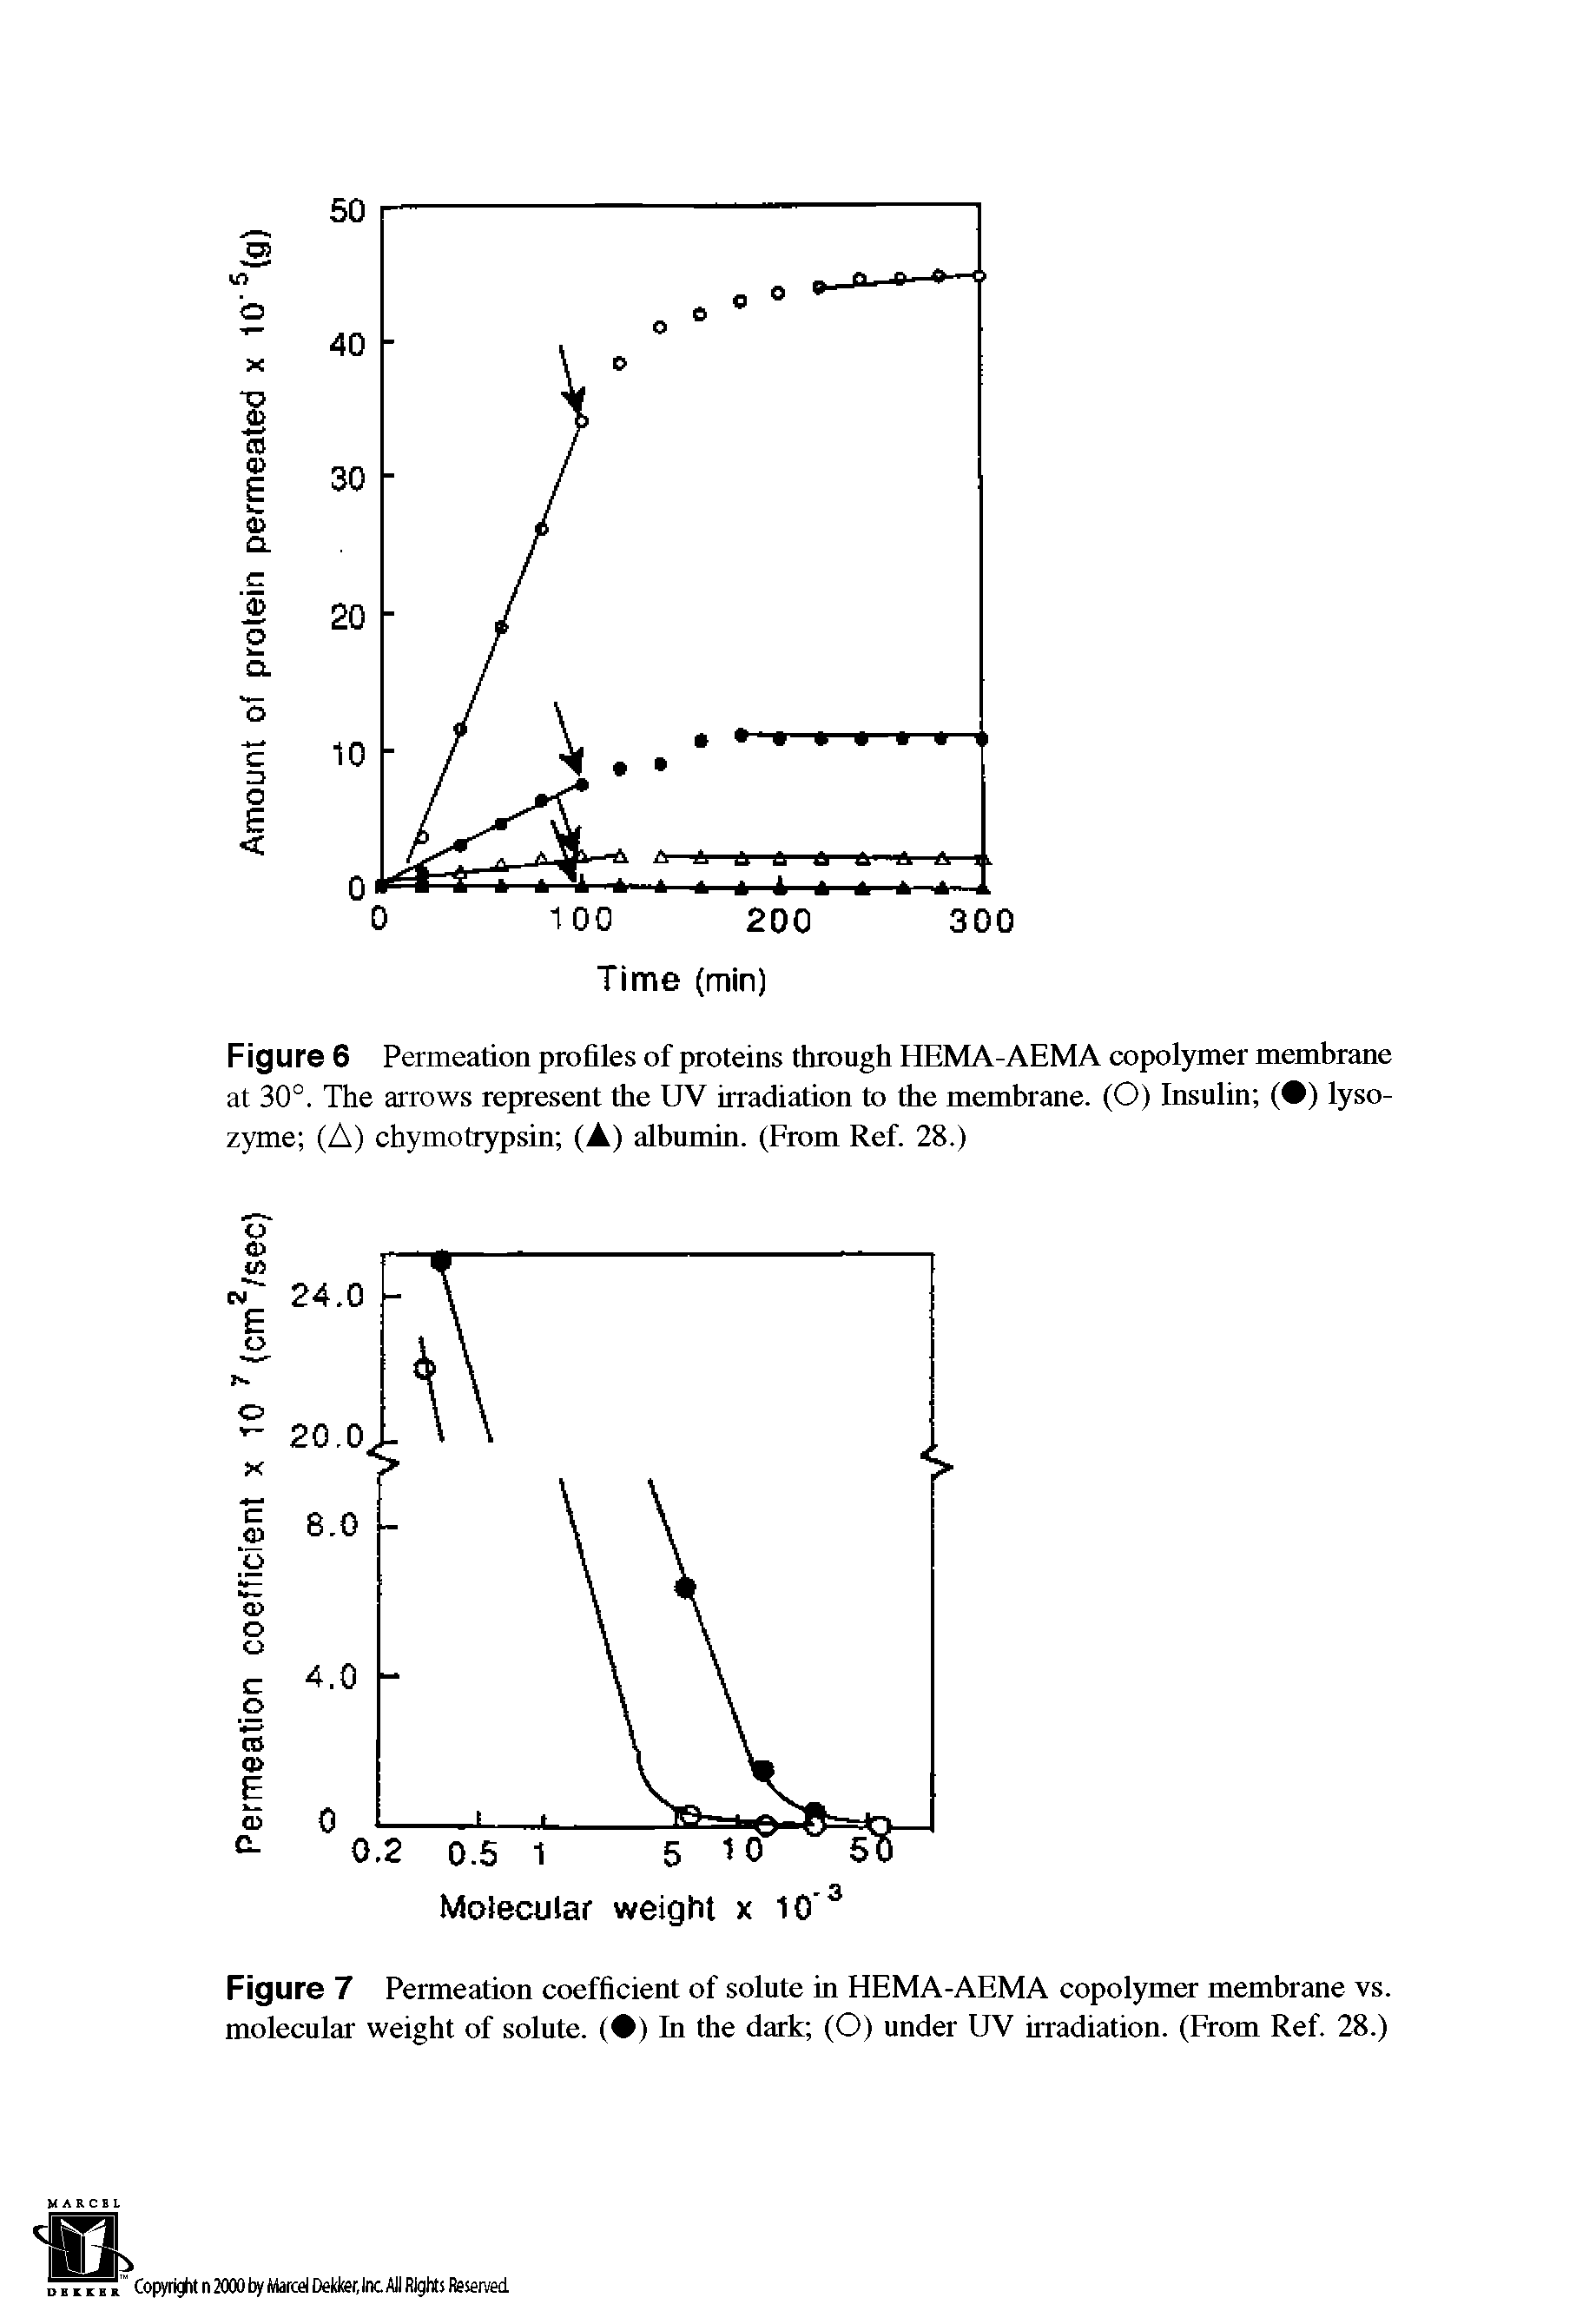 Figure 6 Permeation profiles of proteins through HEMA-AEMA copolymer membrane at 30°. The arrows represent the UV irradiation to the membrane. (O) Insulin ( ) lysozyme (A) chymotrypsin (A) albumin. (From Ref. 28.)...